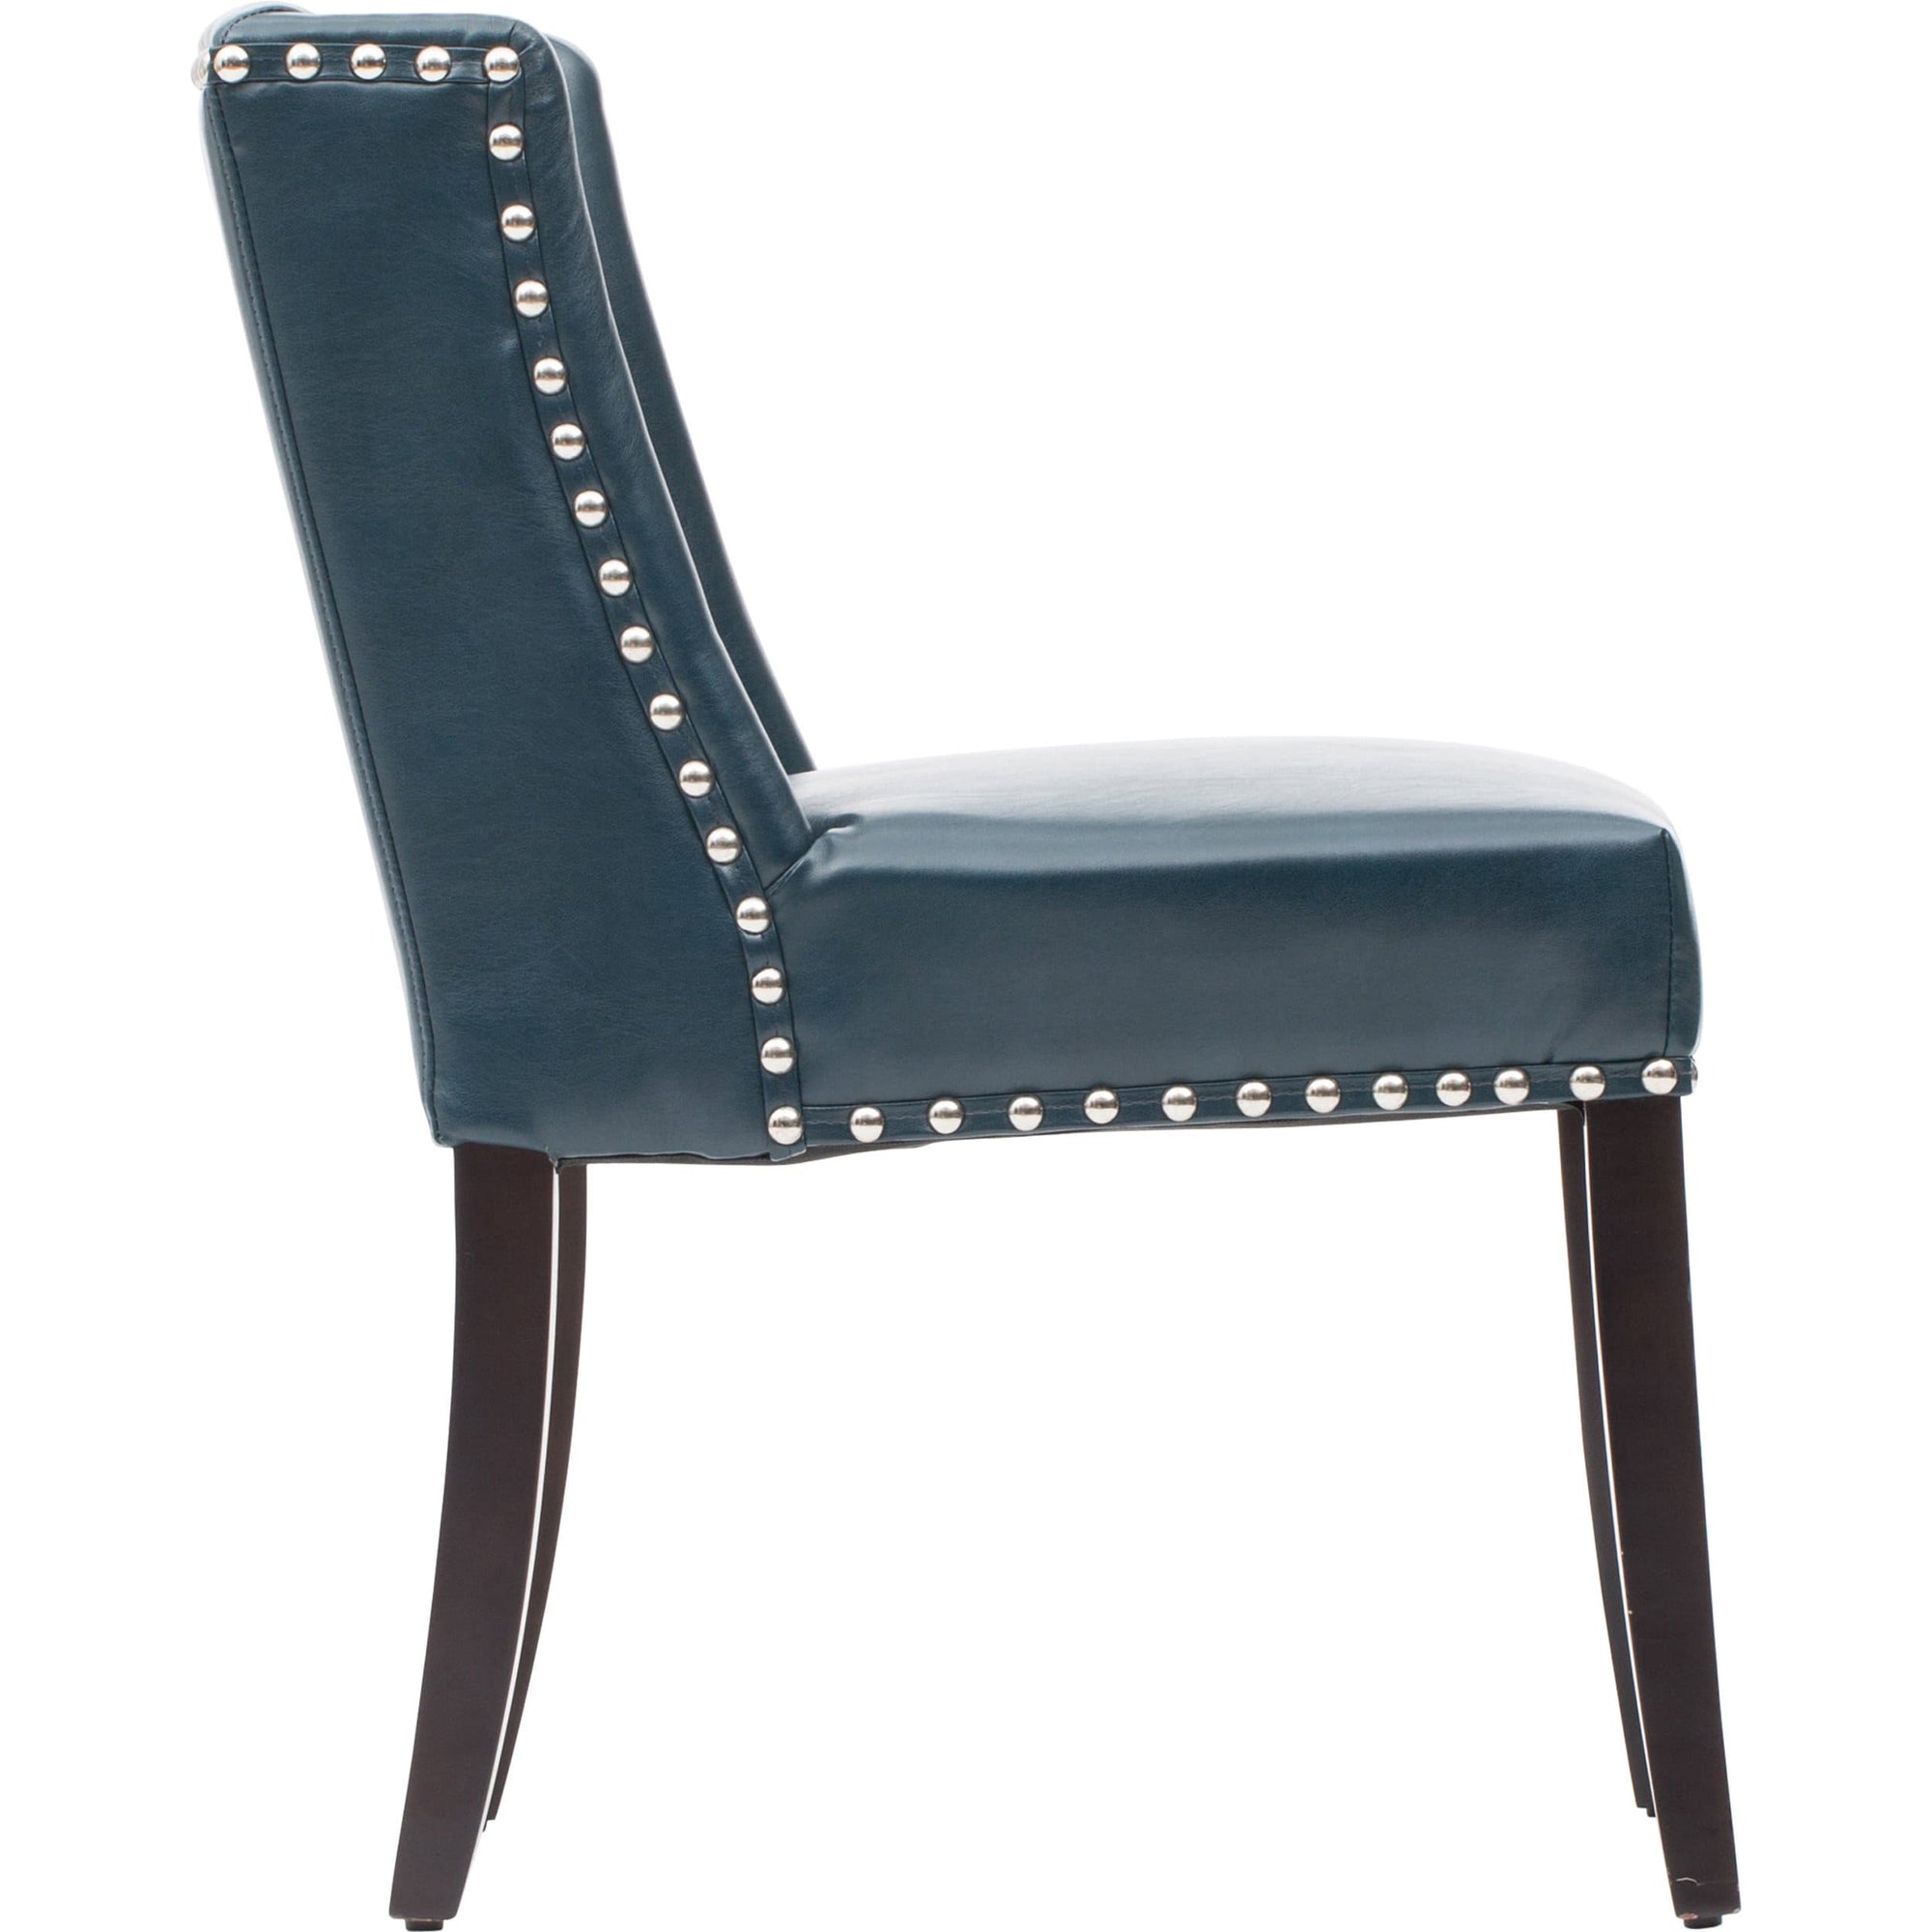 Marlin Leather Dining Chair